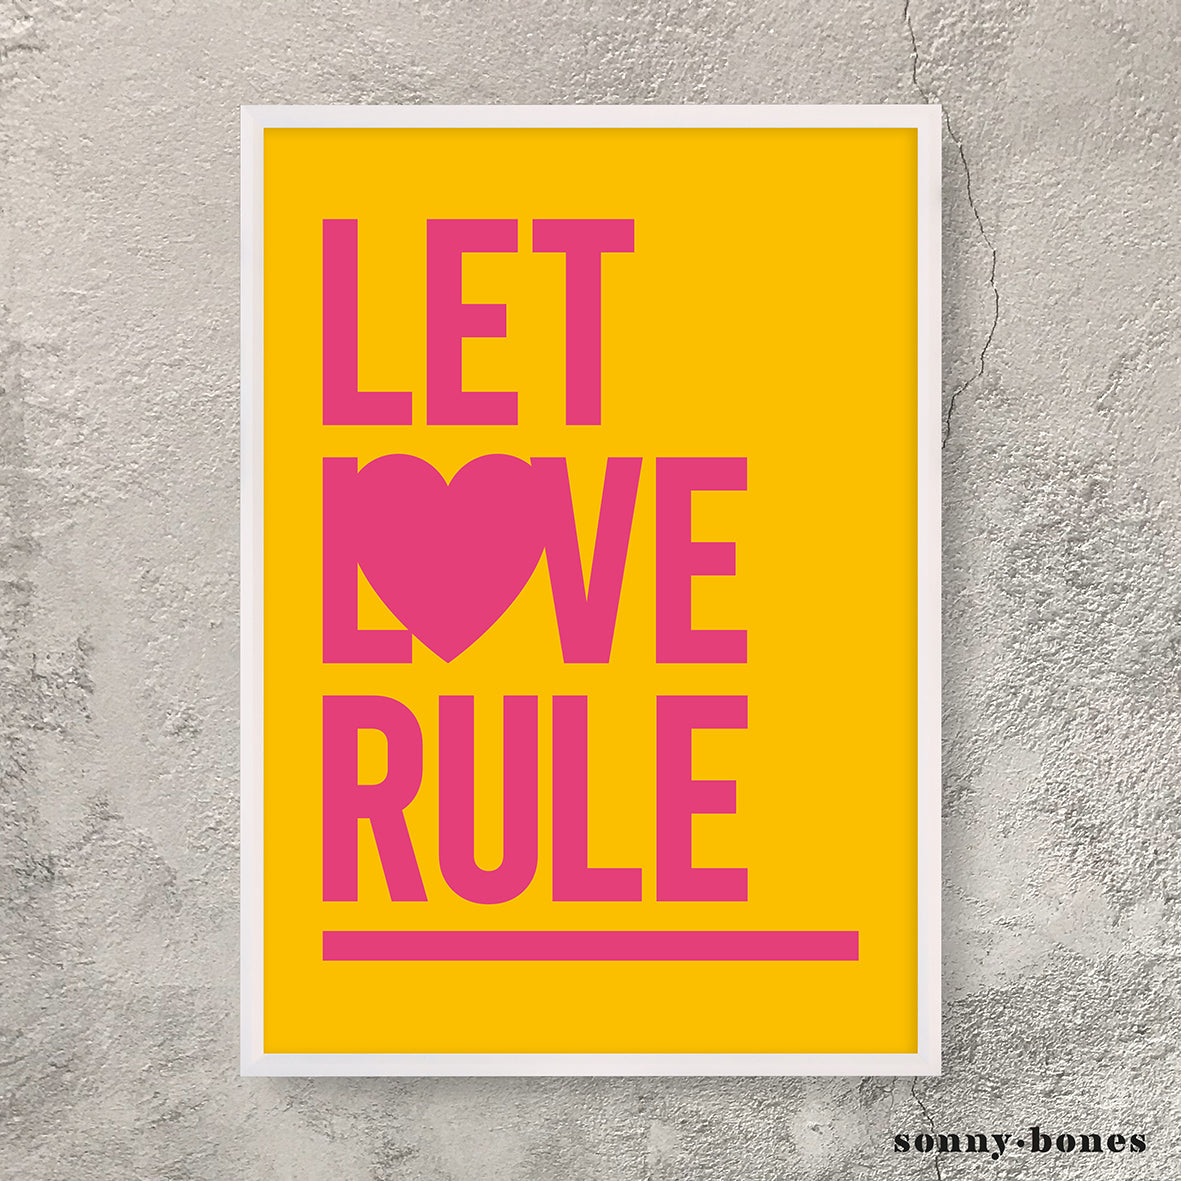 LET LOVE RULE (pink/yellow)